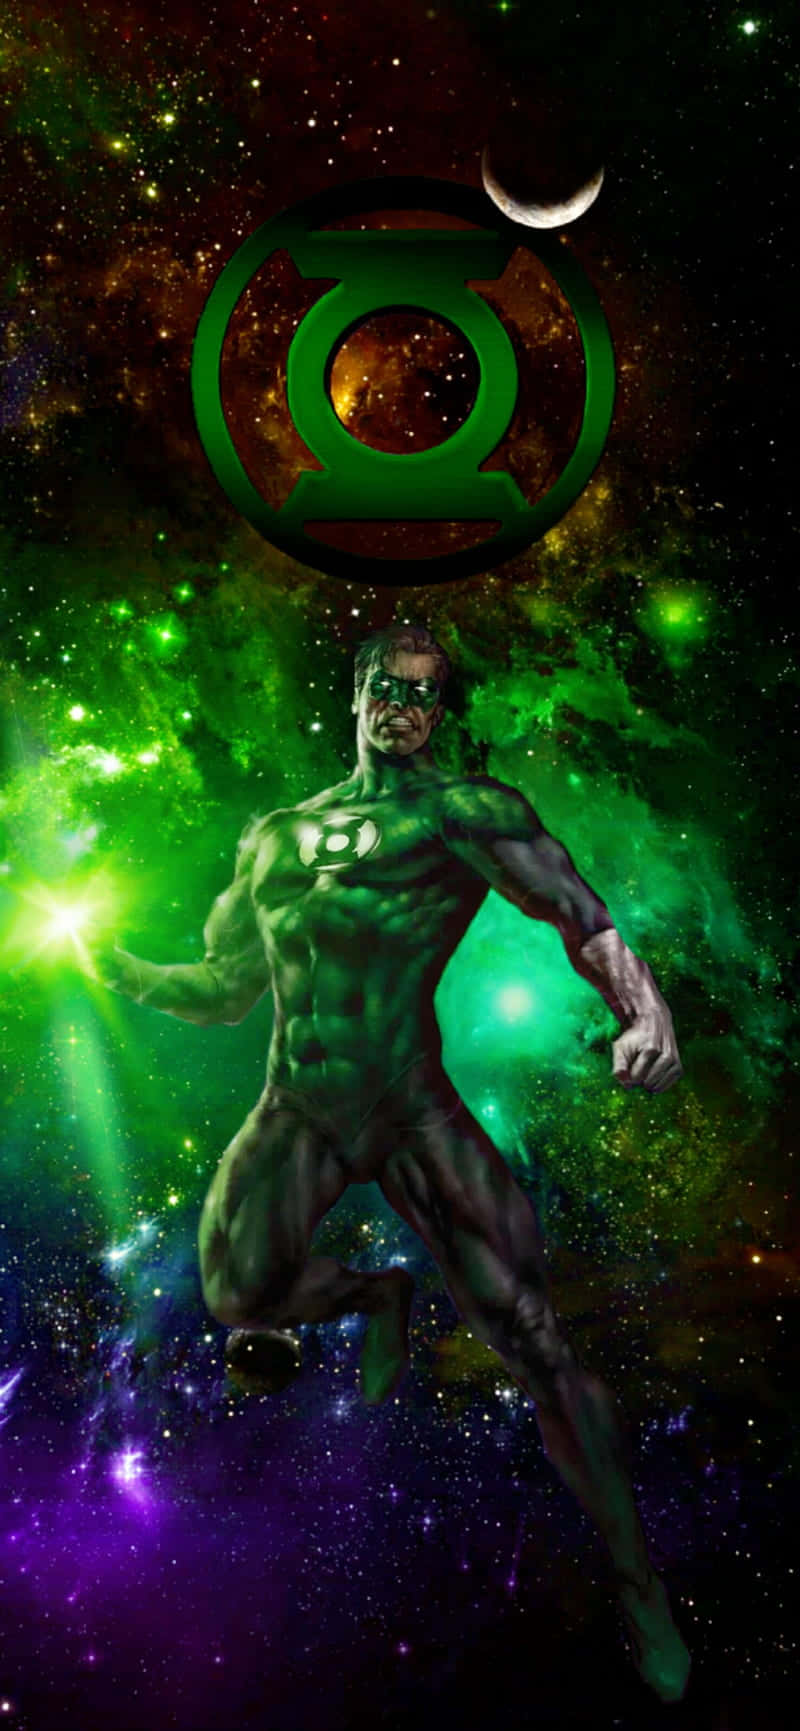 Green Lantern The Animated Series Galaxy Poster Wallpaper